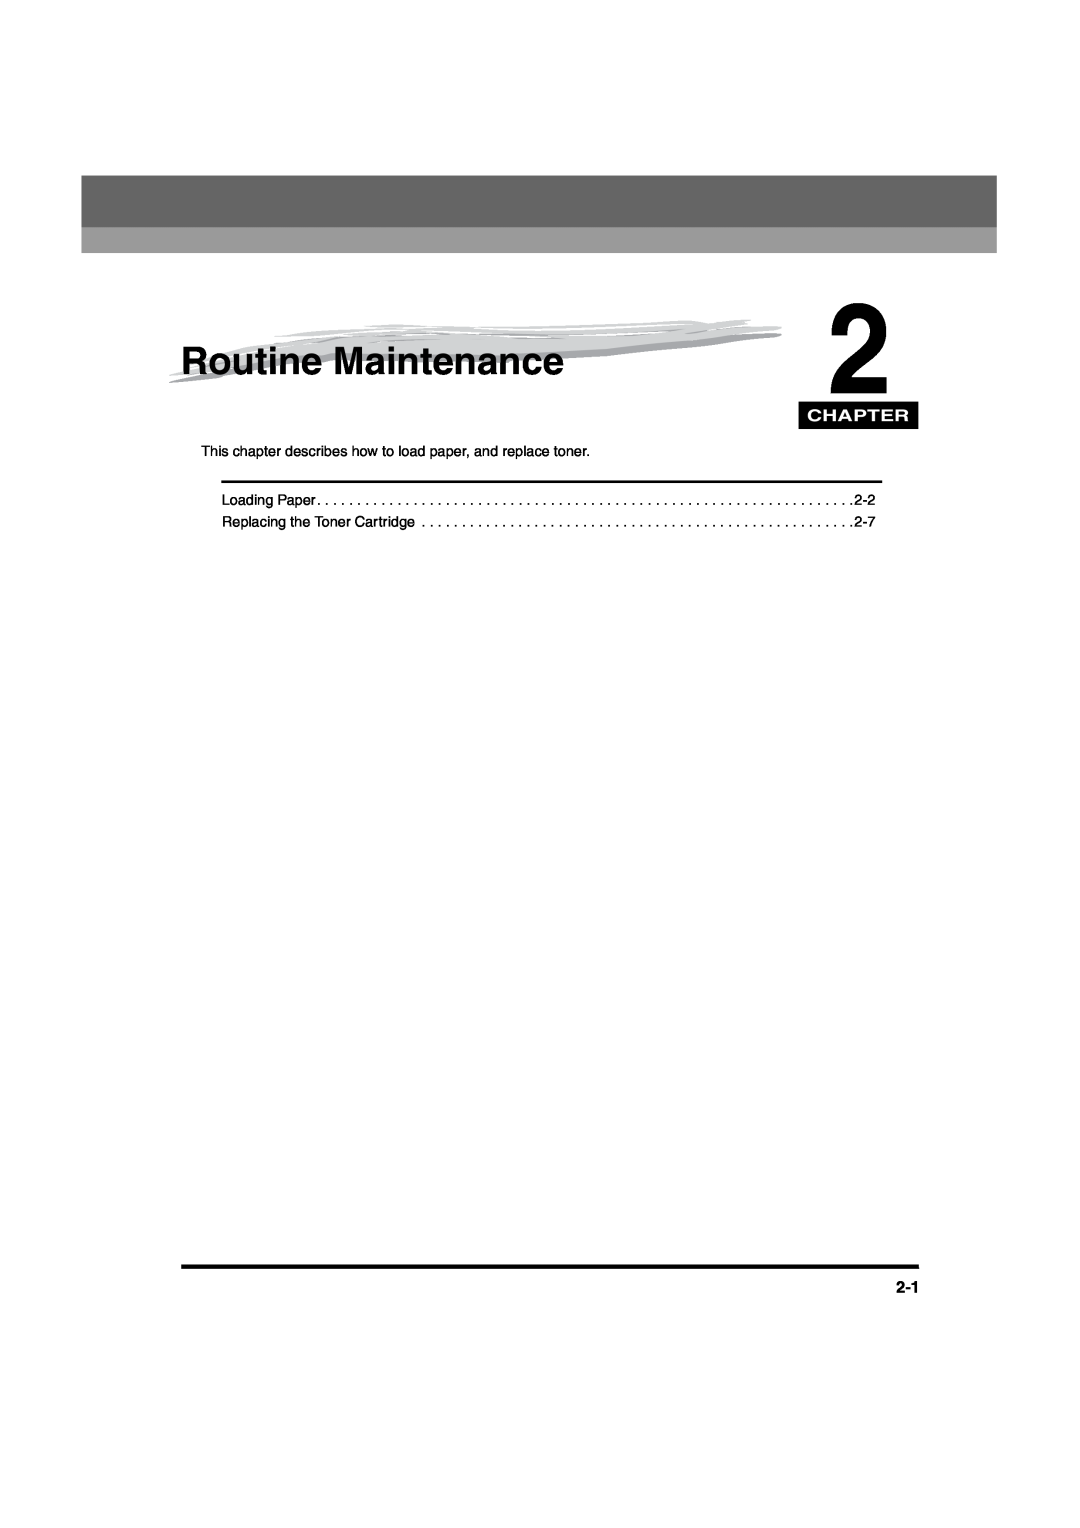 Canon iR6570 manual Routine Maintenance, Chapter, This chapter describes how to load paper, and replace toner 